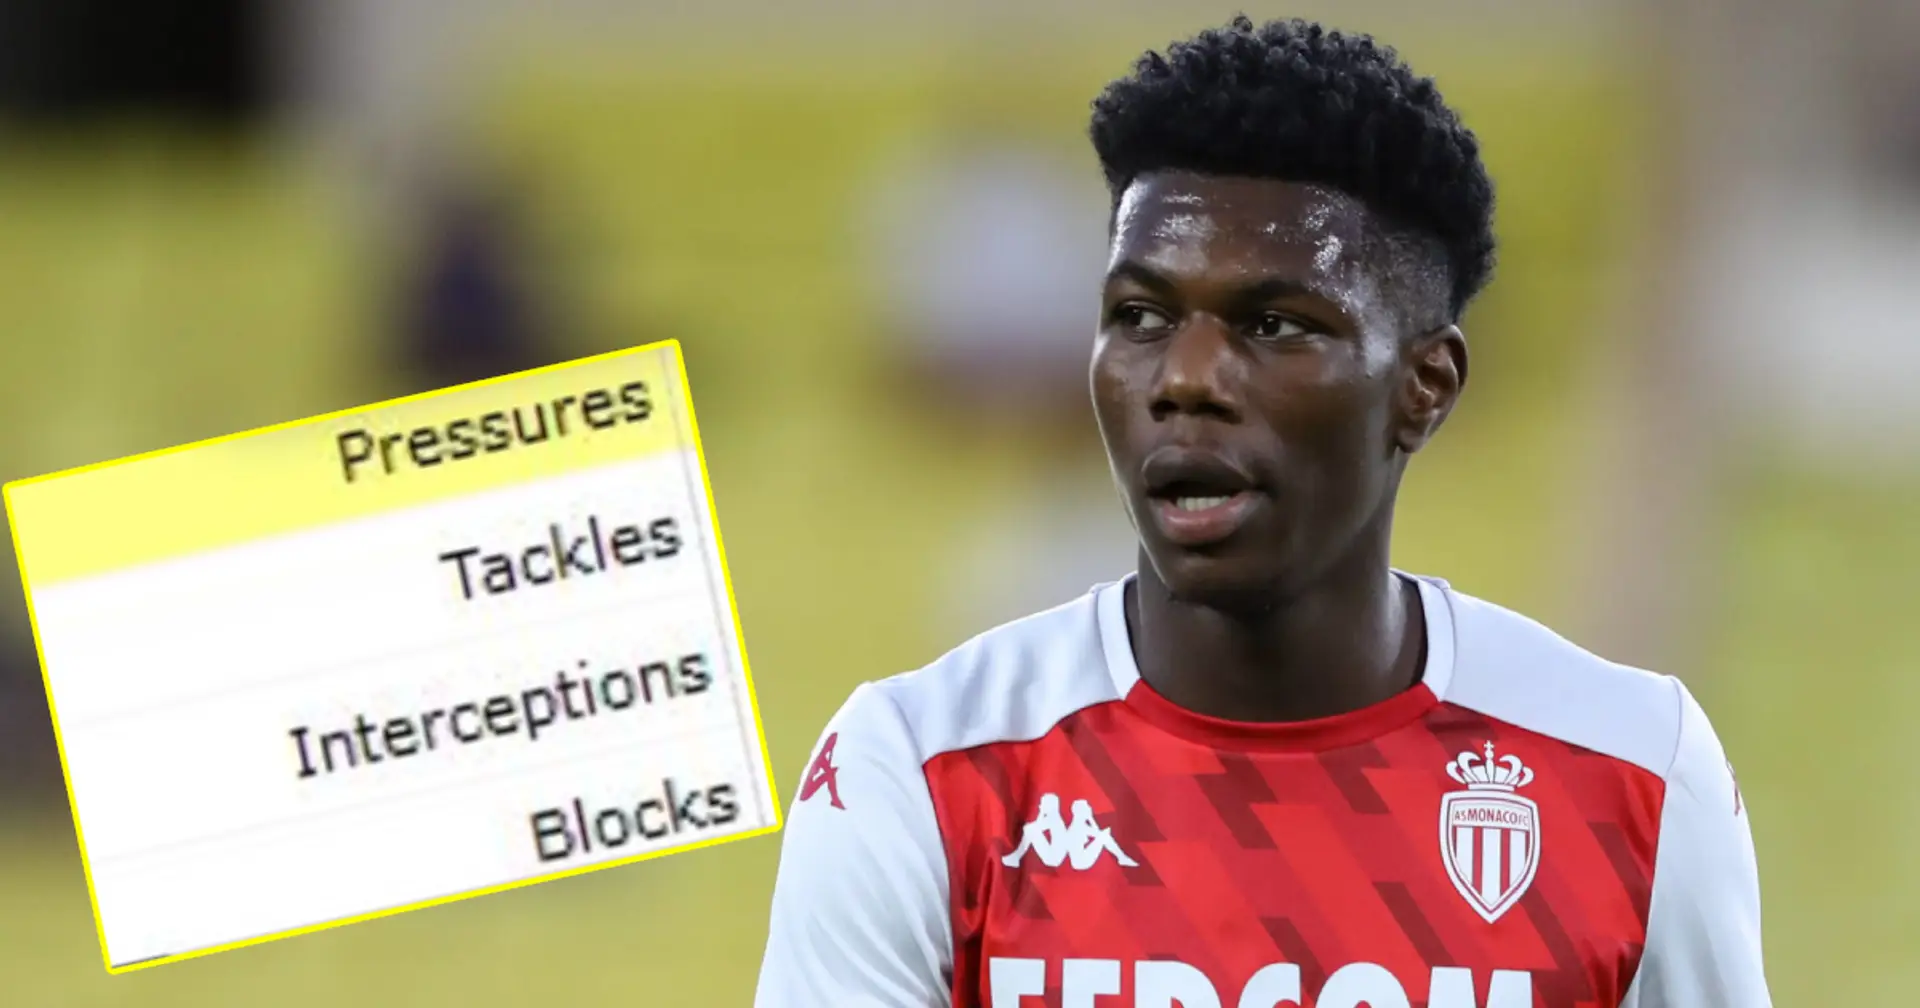 5 stats show why Real Madrid and 5 top clubs are interested in Tchouameni